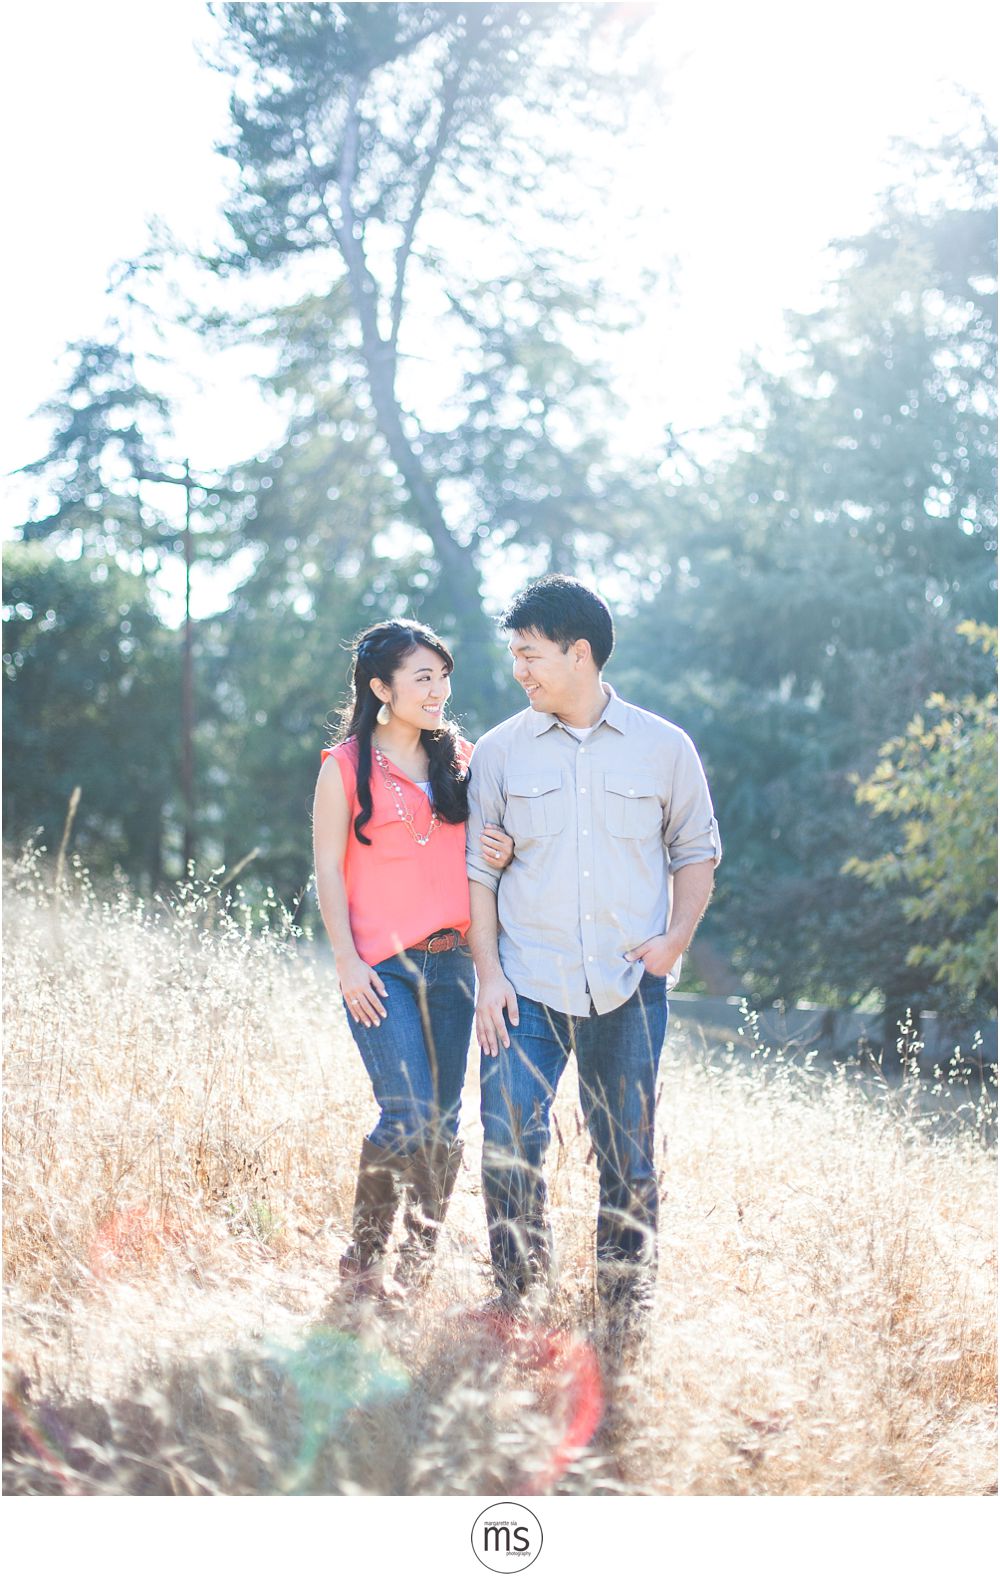 Sarah & Charles Engagement Portraits at Franklin Canyon Park Margarette Sia Photography_0003